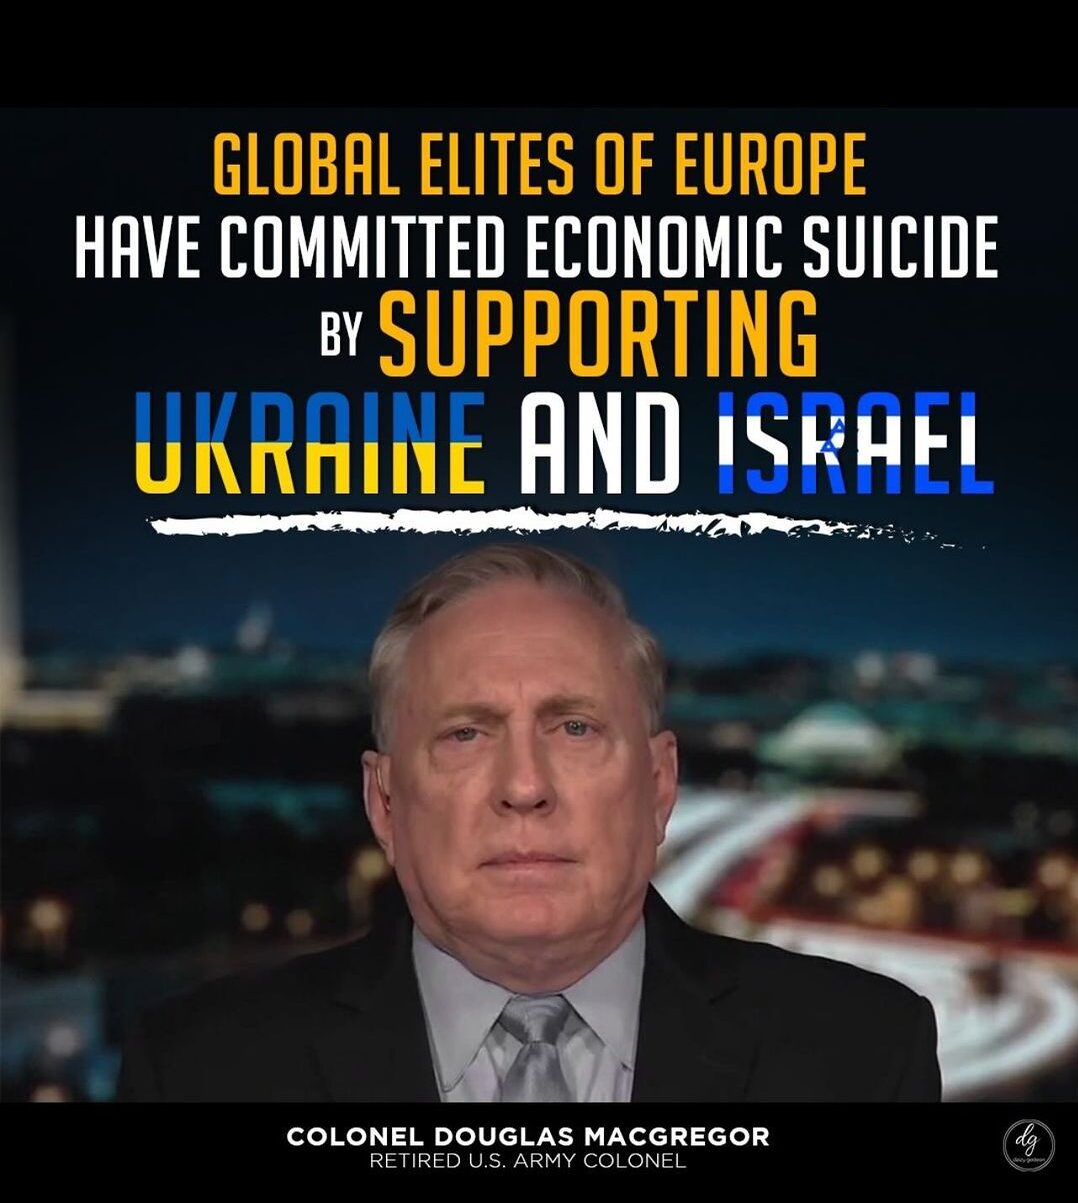 GLOBAL-ELITES-OF-EUROPE-HAVE-COMMITTED-ECONOMIC-SUICIDE-BY-SUPPORTING-UKRAINE-AND-ISRAEL-e1712560184820